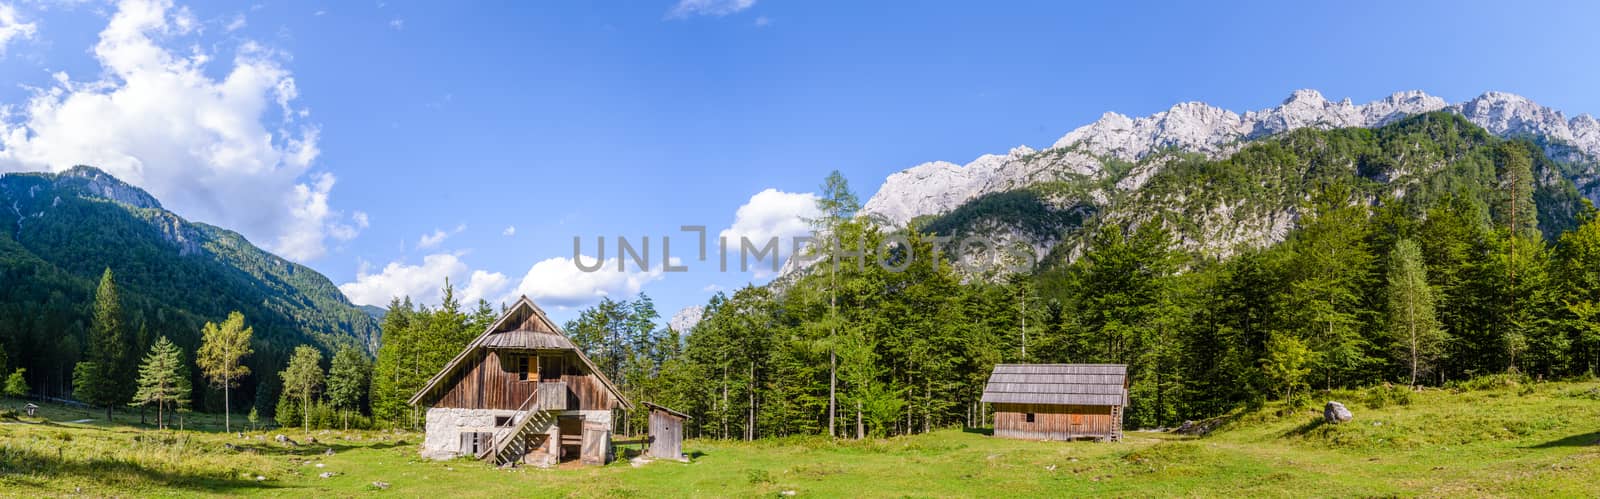 Mountain cabin, hut in European Alps, located in Robanov kot, Slovenia, popular hiking and climbing place with picturescue view, XXXL Large Panorama